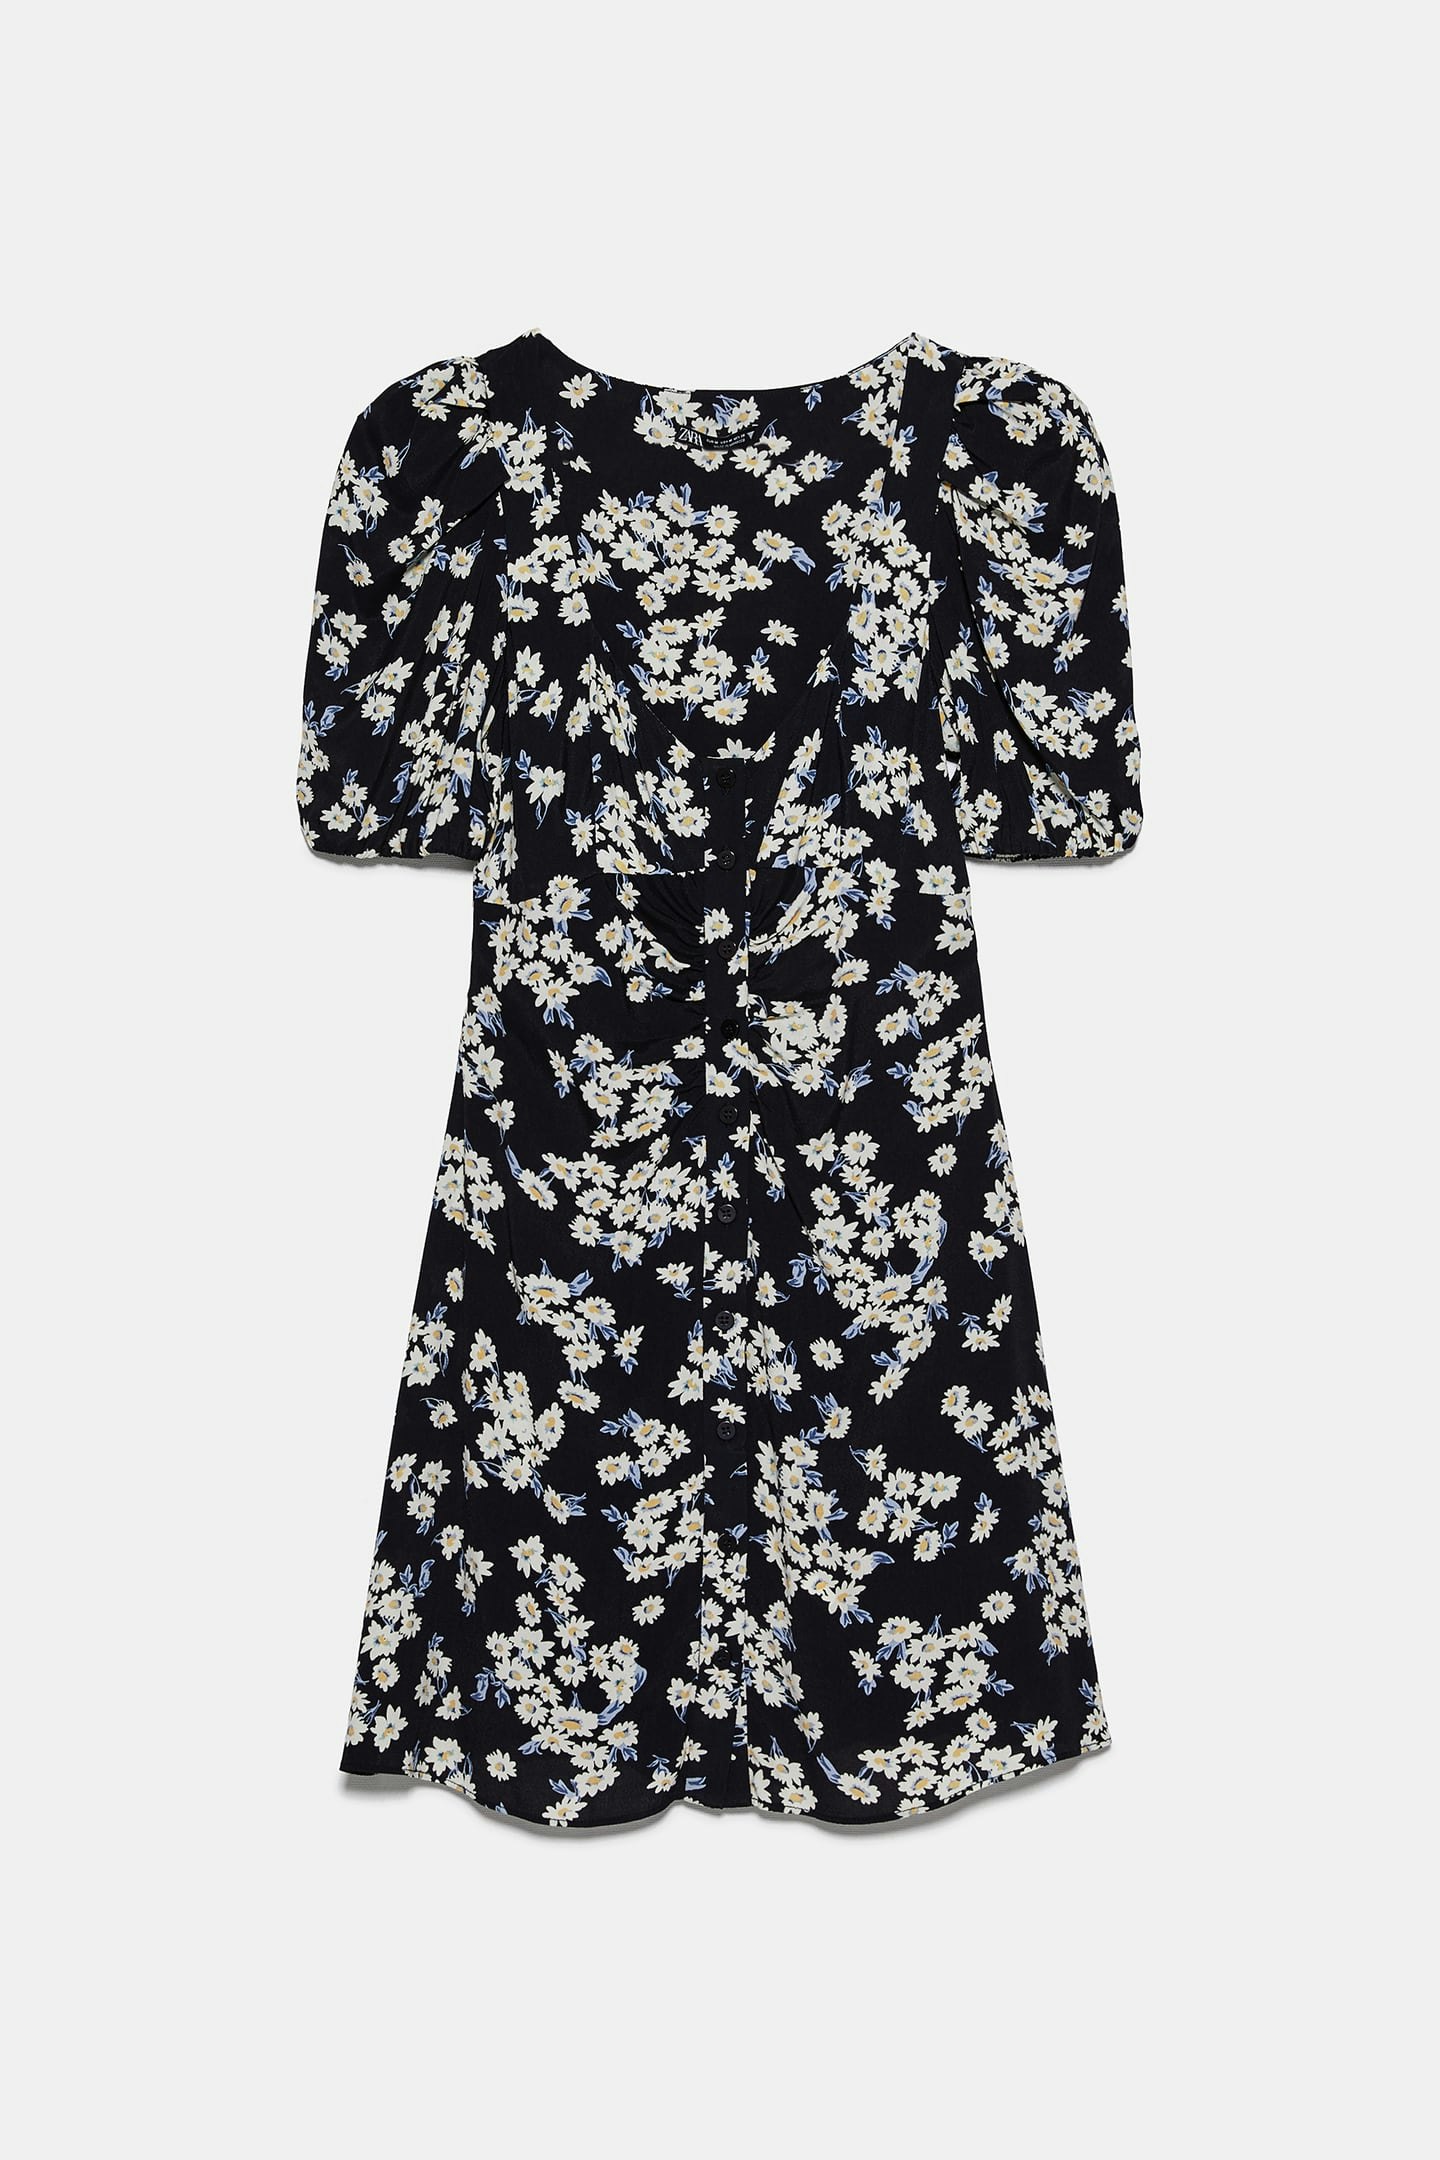 Best daisy print dresses, tops and skirts